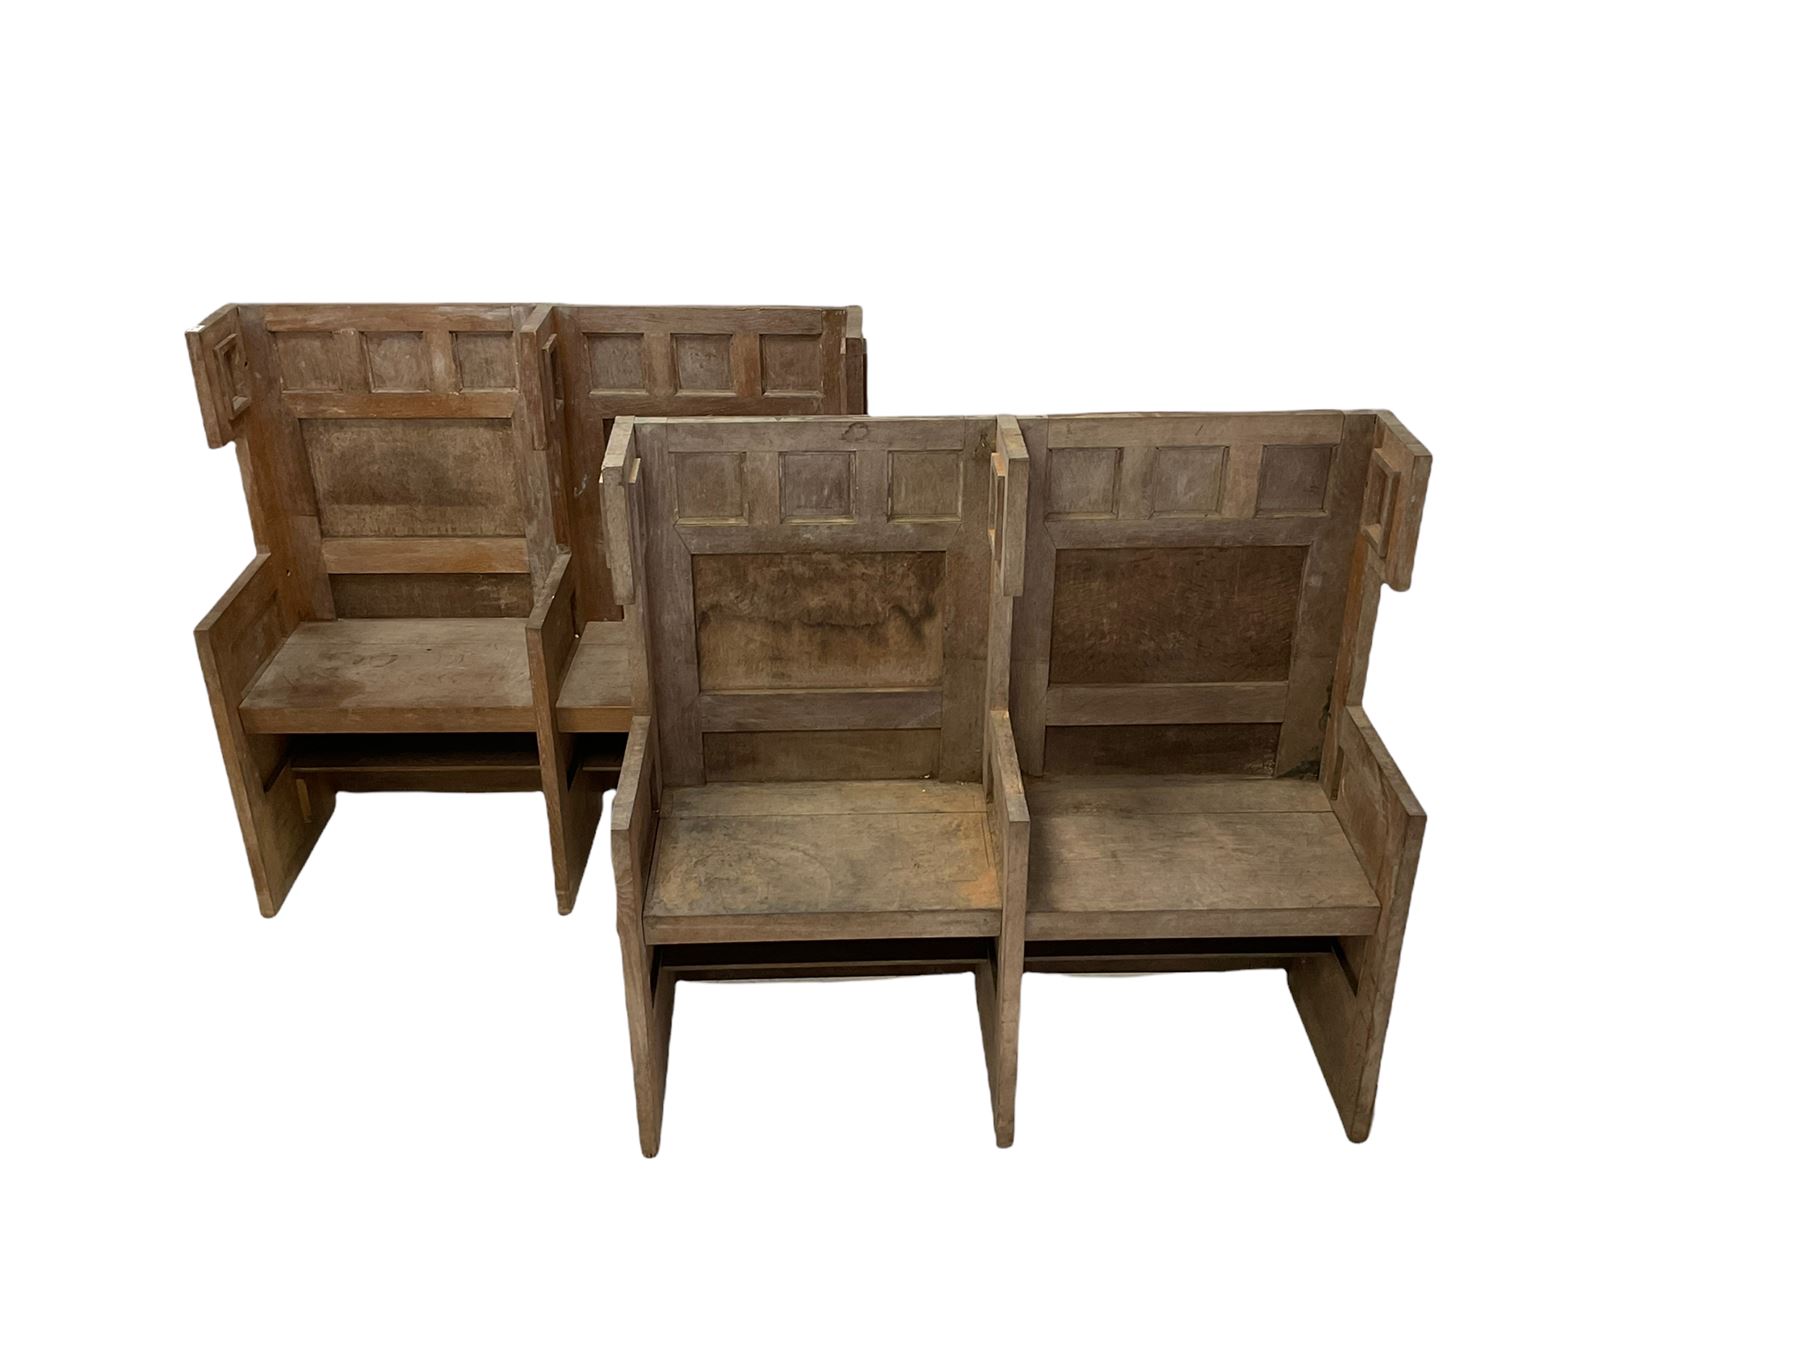 Pair of two seater oak priory pews with hinged seats W125cm - Image 7 of 7